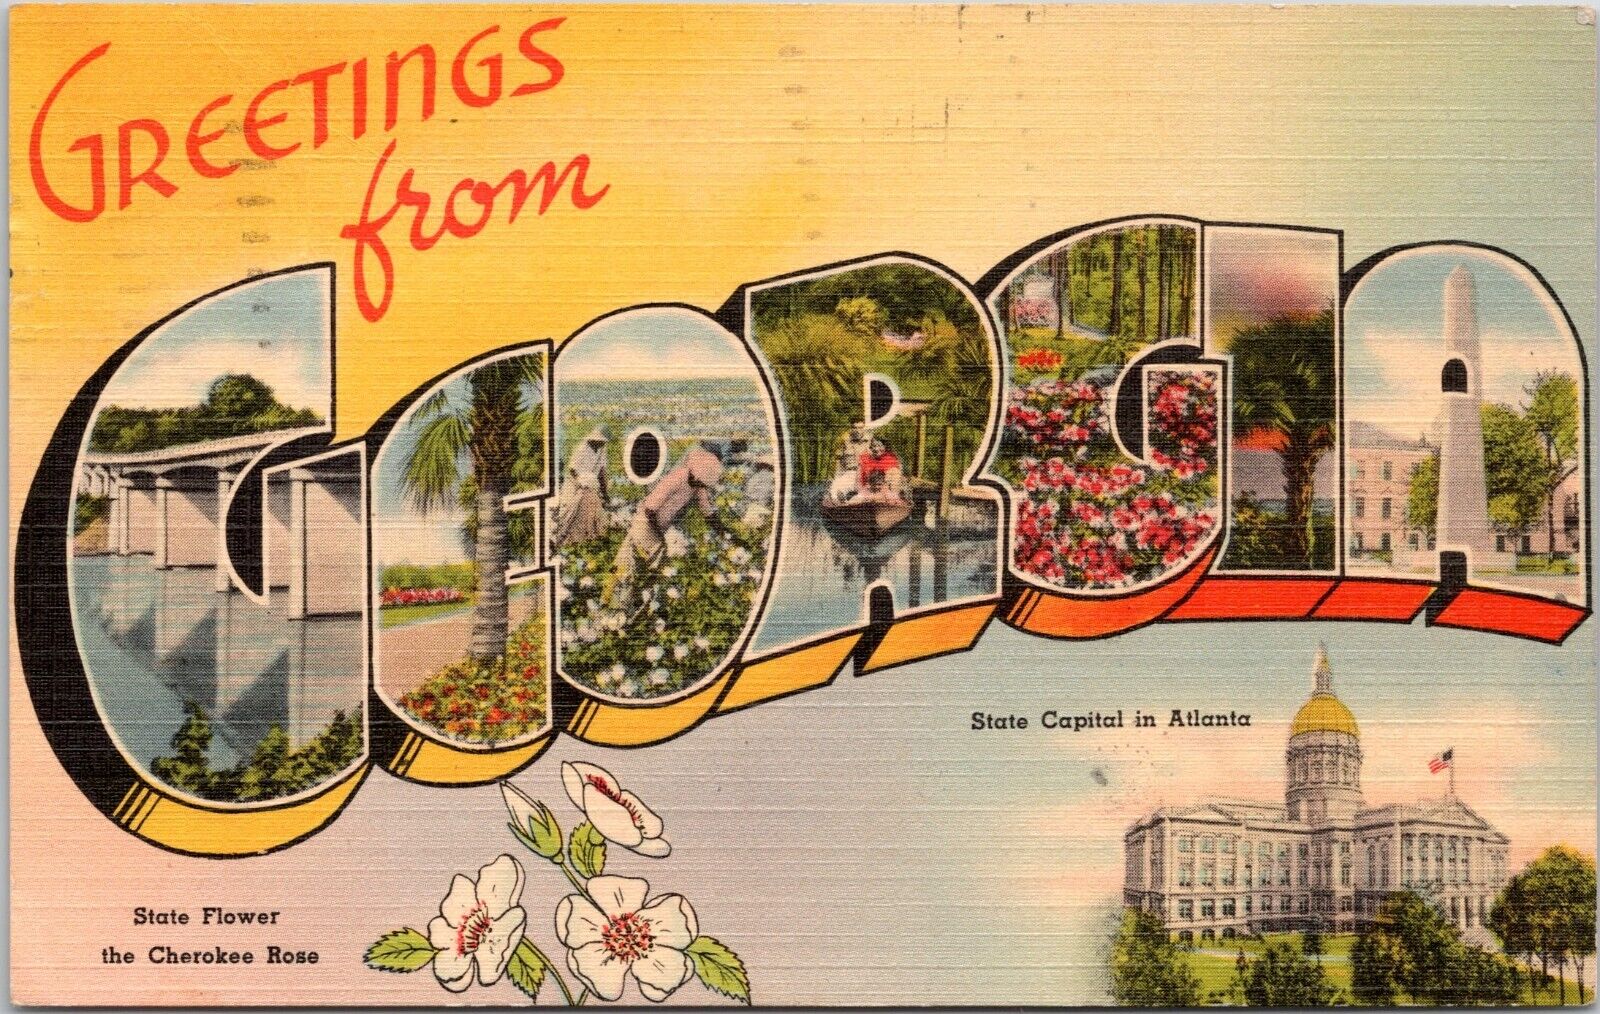 Large Letter Greetings from Georgia- 1944 Linen Postcard - State Capitol, Flower